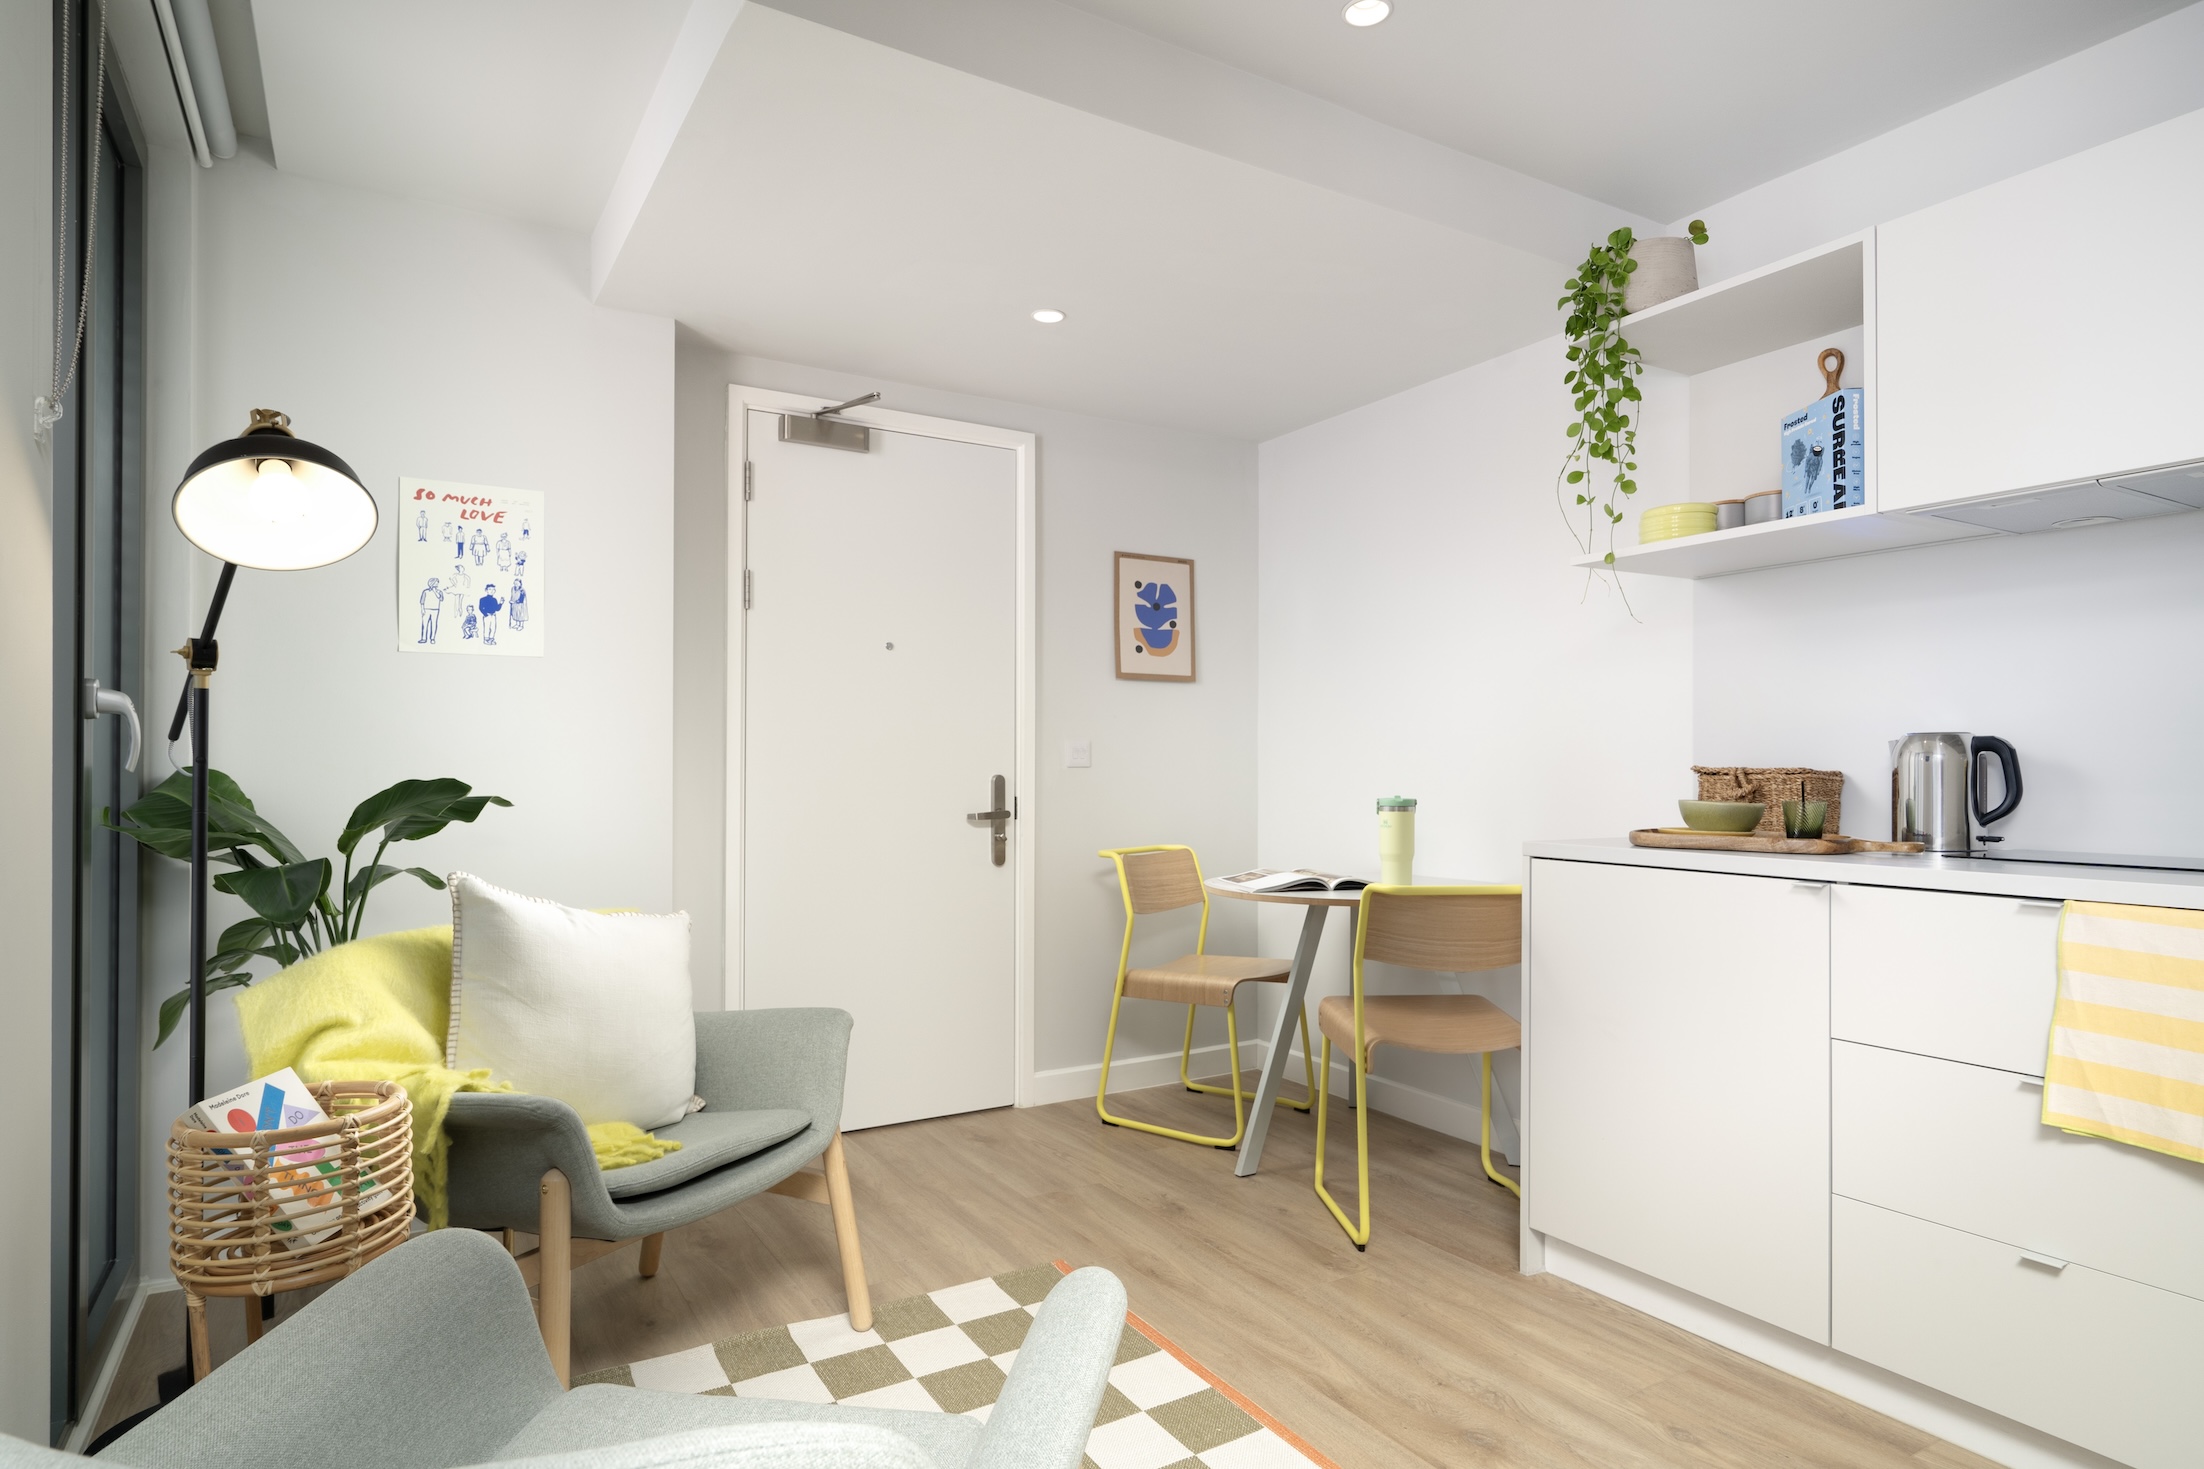 Scape Leeds Shared Apartment